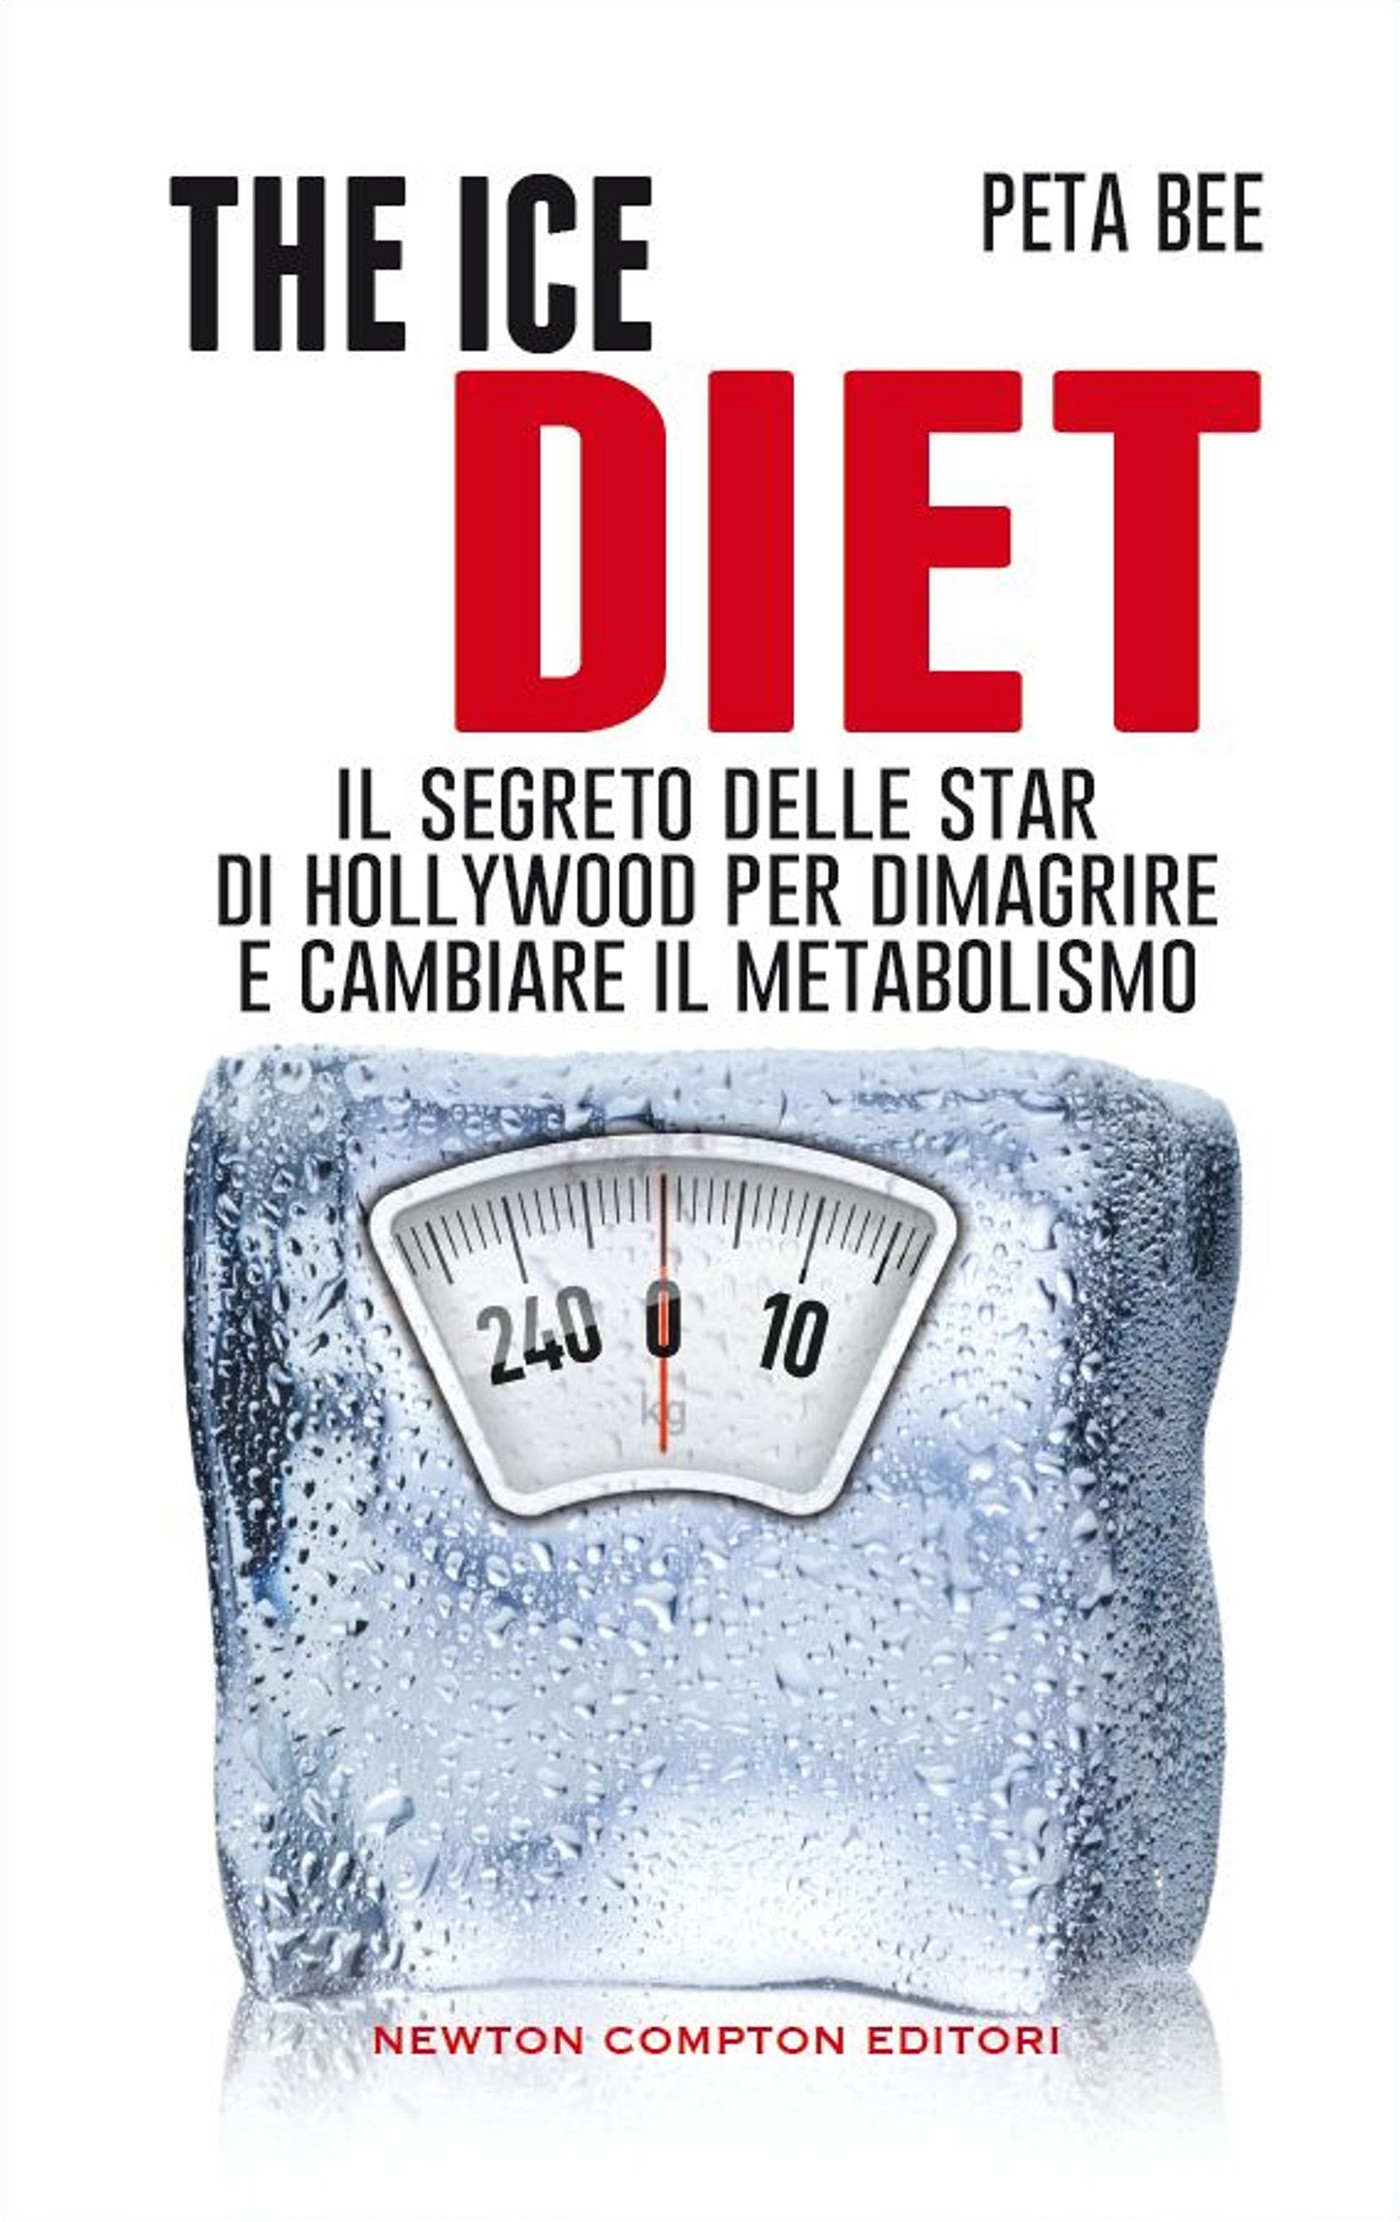 The ice diet - Librerie.coop